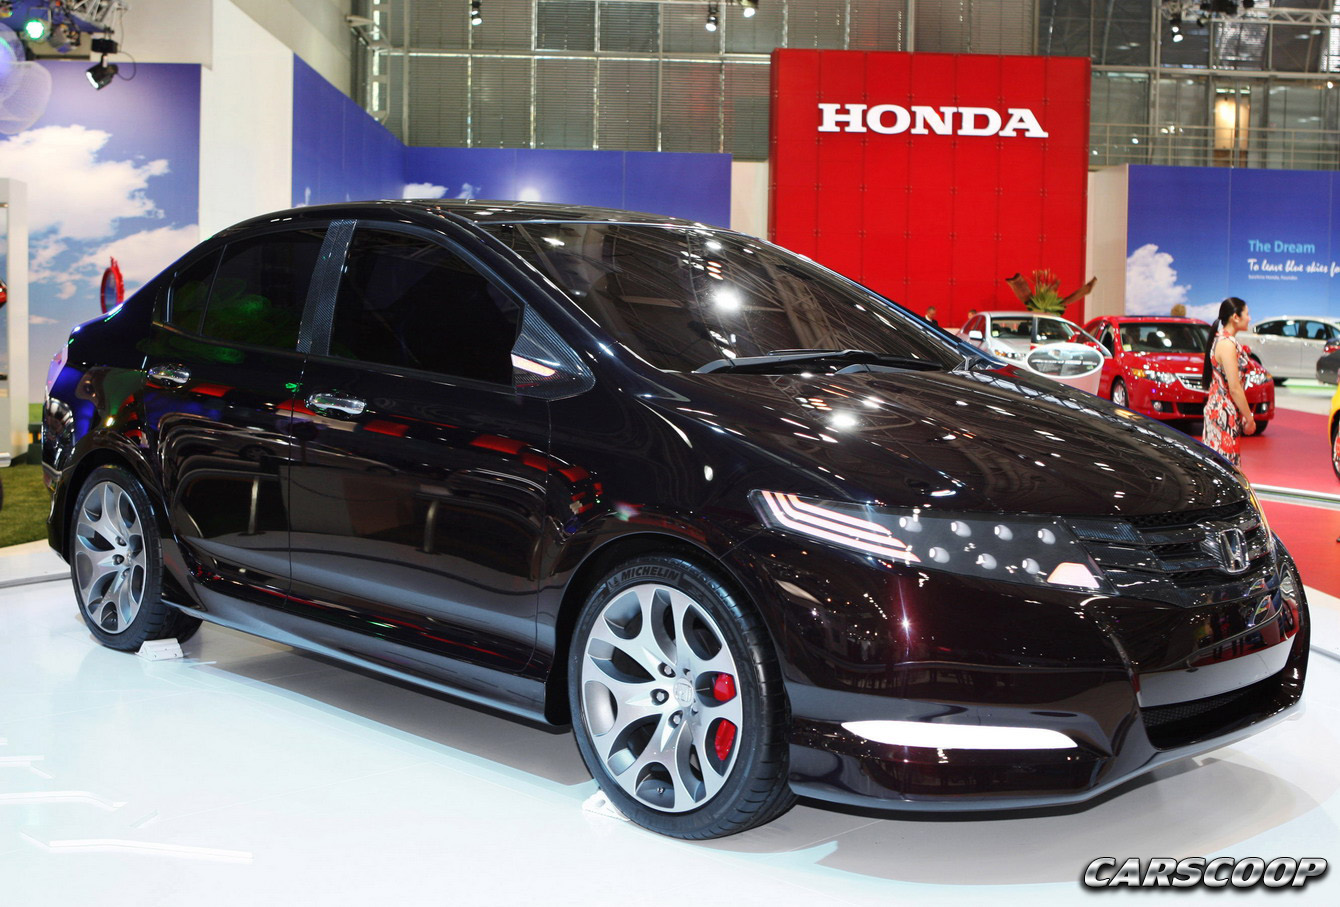 THE WORLDS FAMOUS CARS: HONDA CITY 2012